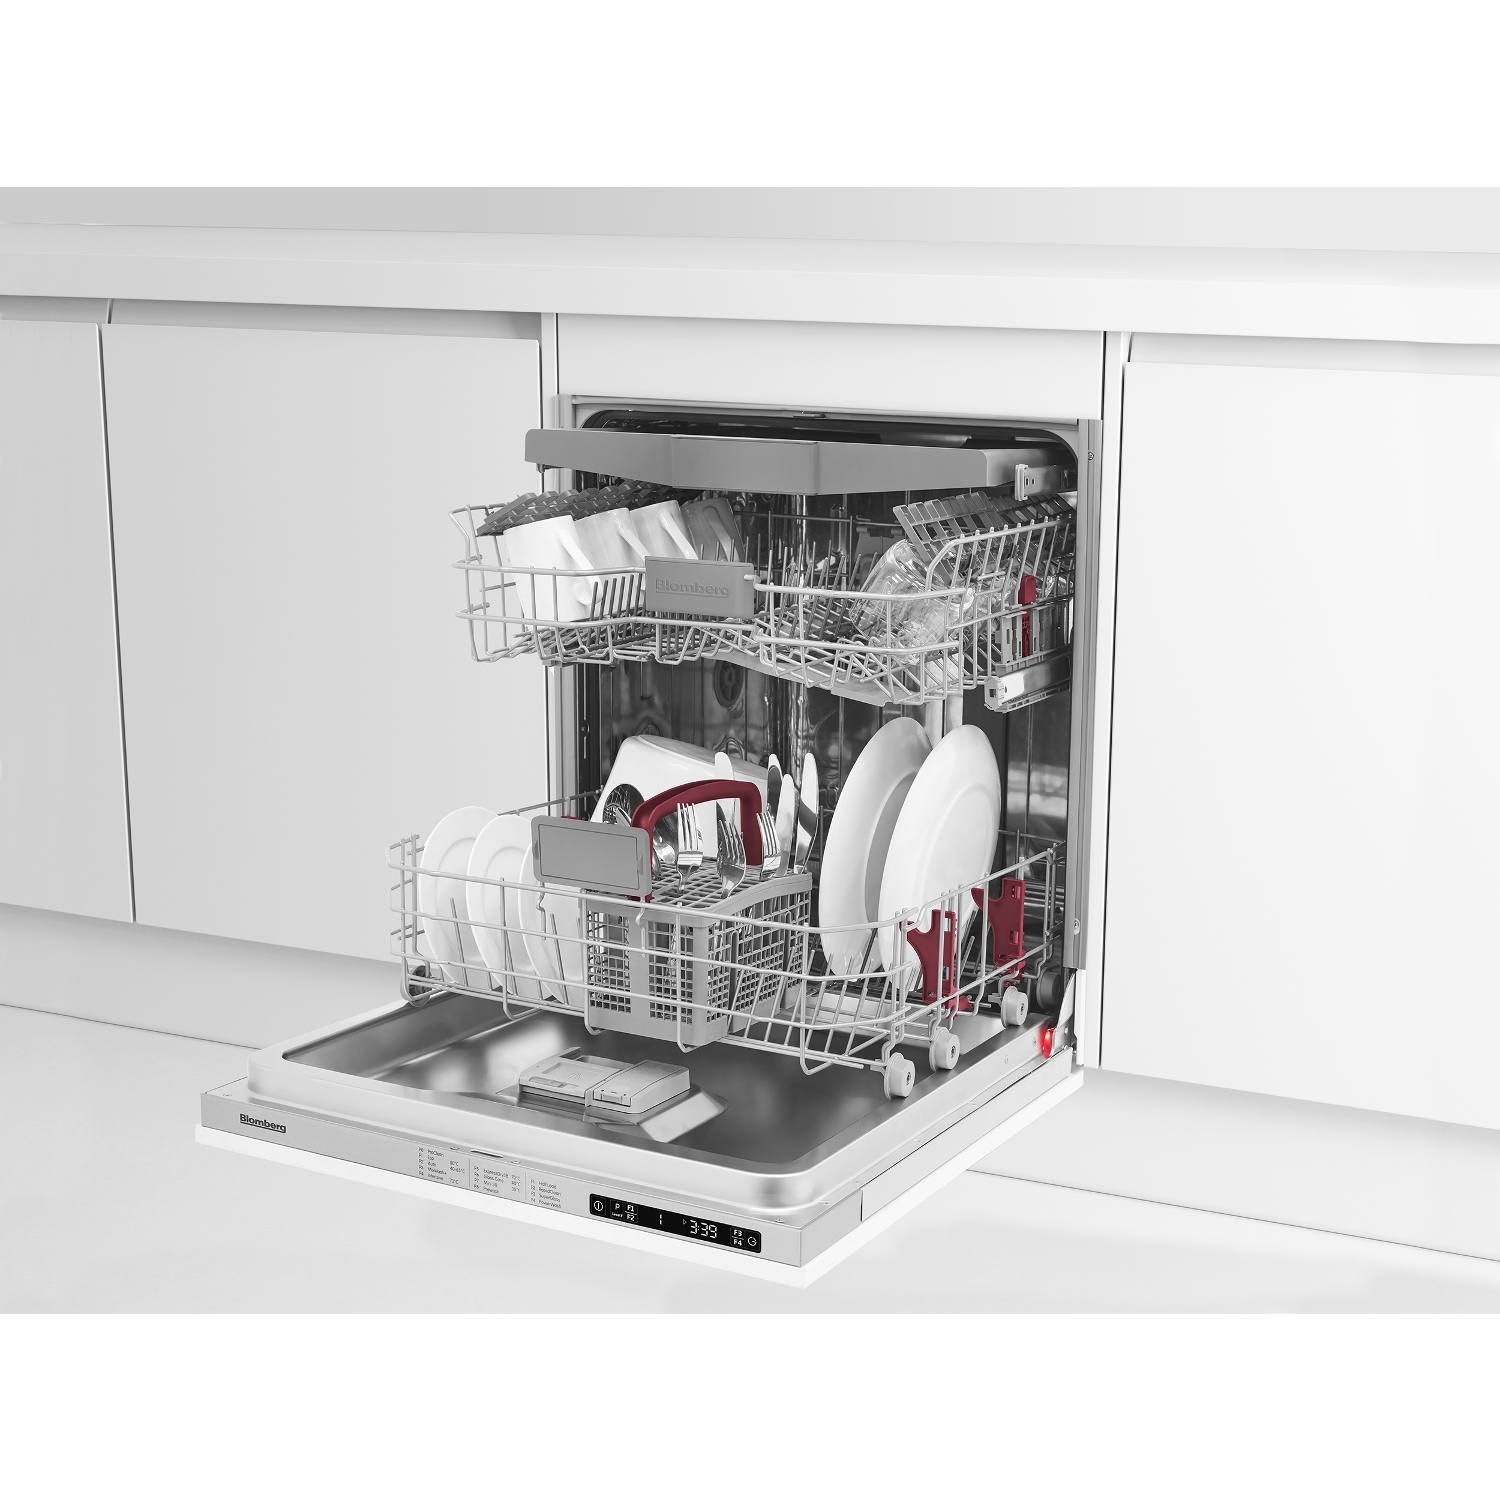 Blomberg LDV42244 Integrated Full Size Dishwasher Free 5 year warranty Which recommend - 6